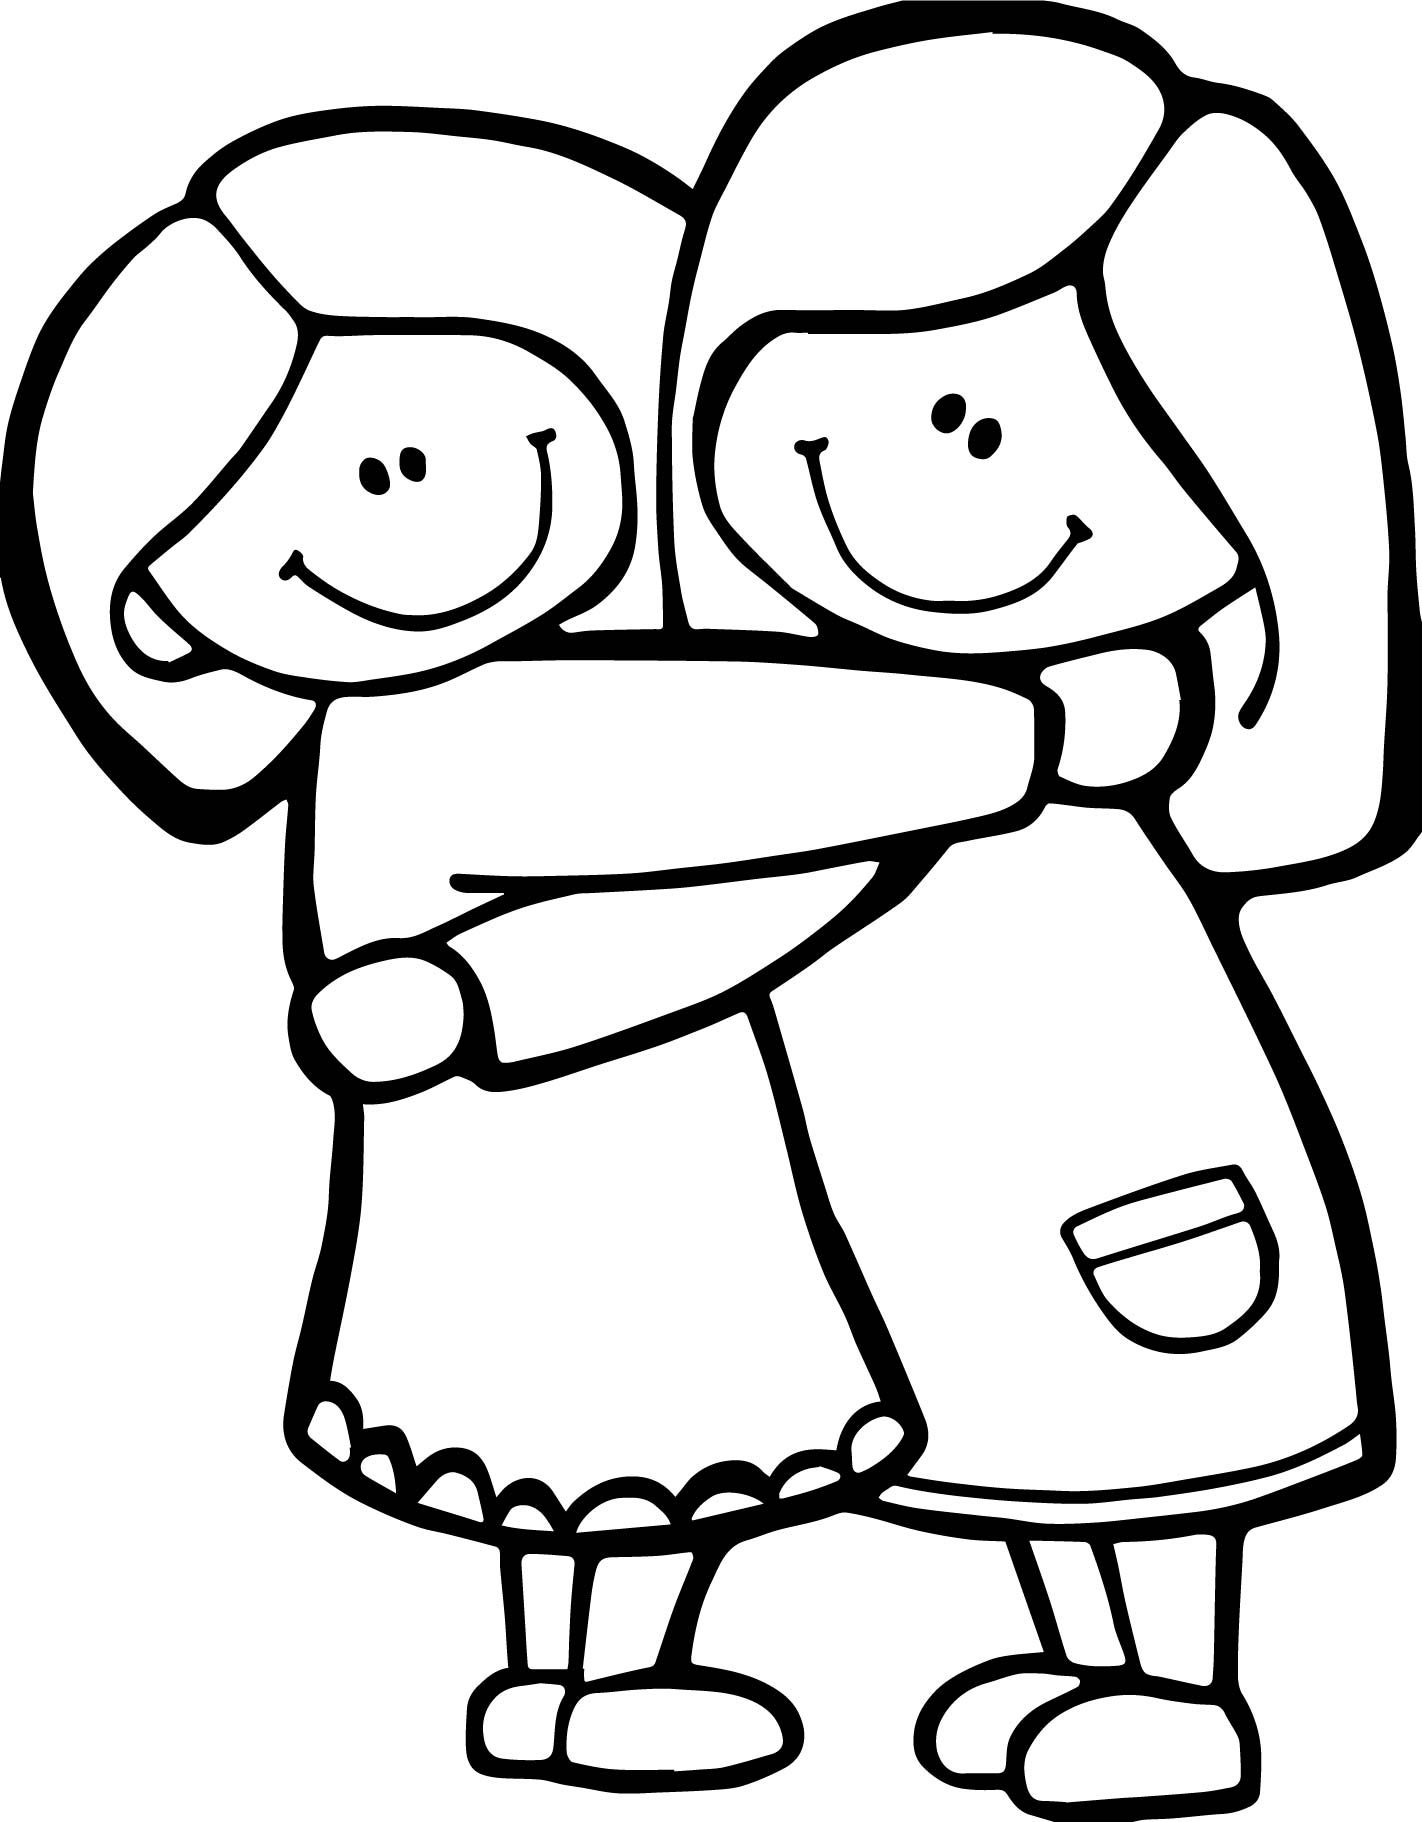 Best Friends Girl Mother Hug Coloring Page - Wecoloringpage.com | Coloring  pages for kids, Dinosaur coloring pages, Coloring pages